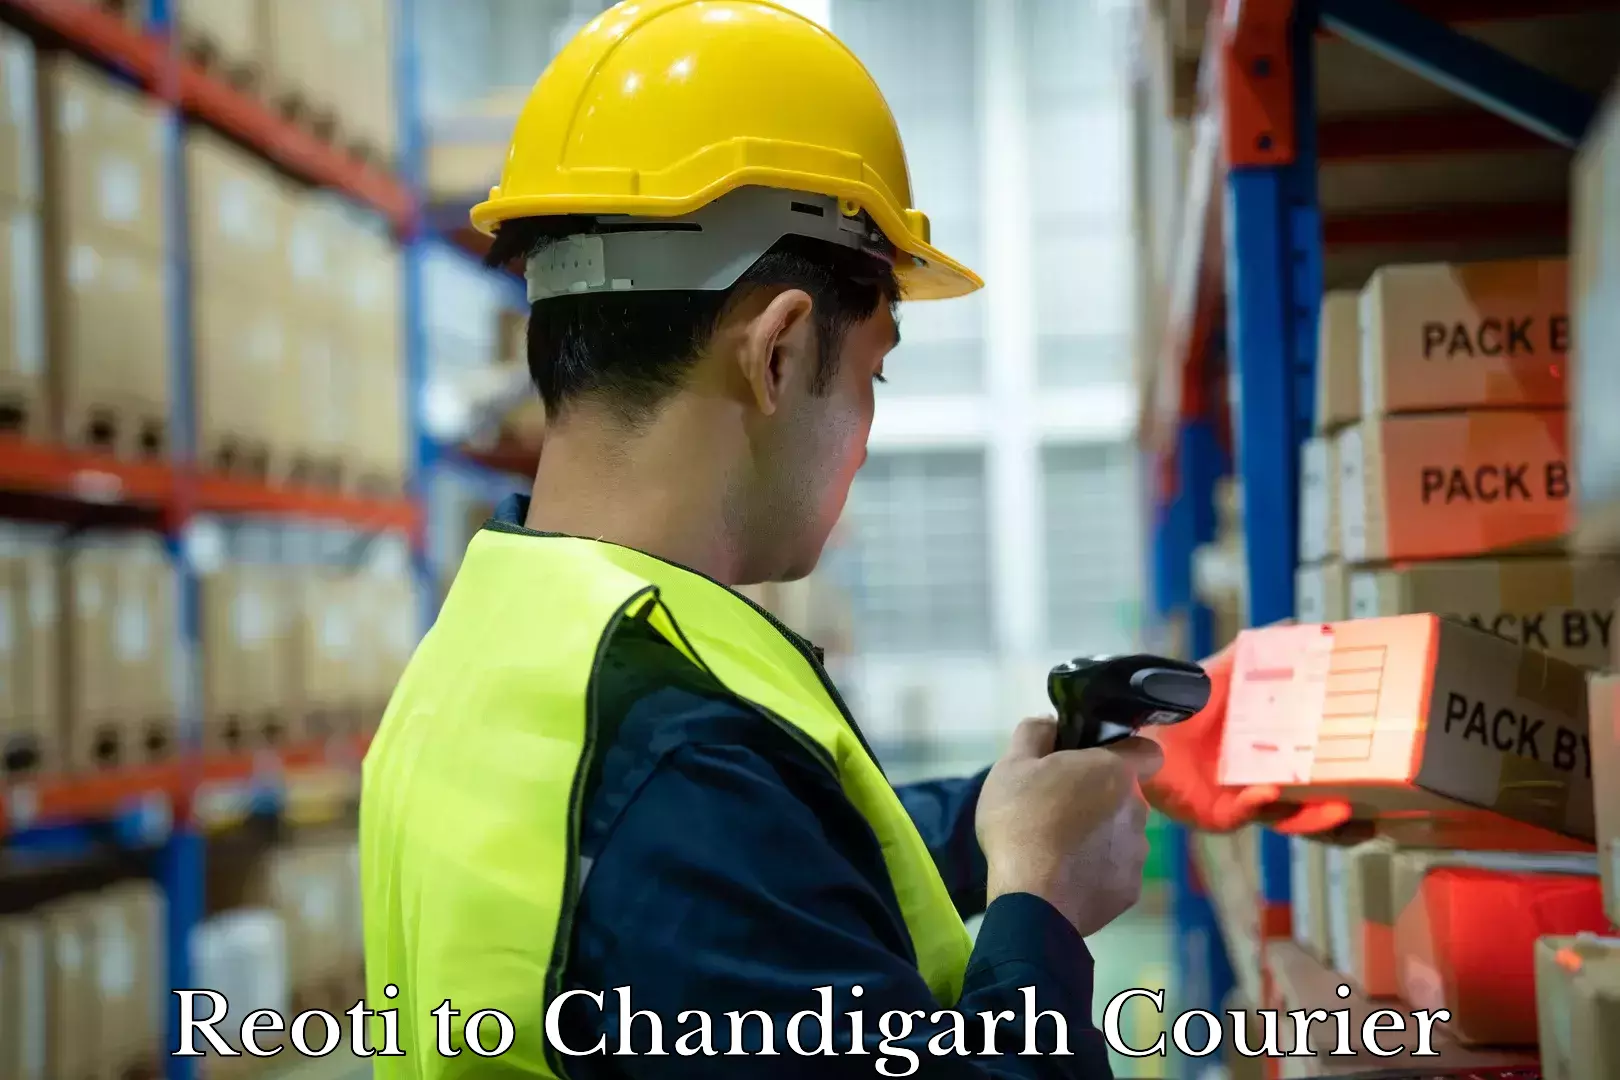 Baggage relocation service Reoti to Chandigarh